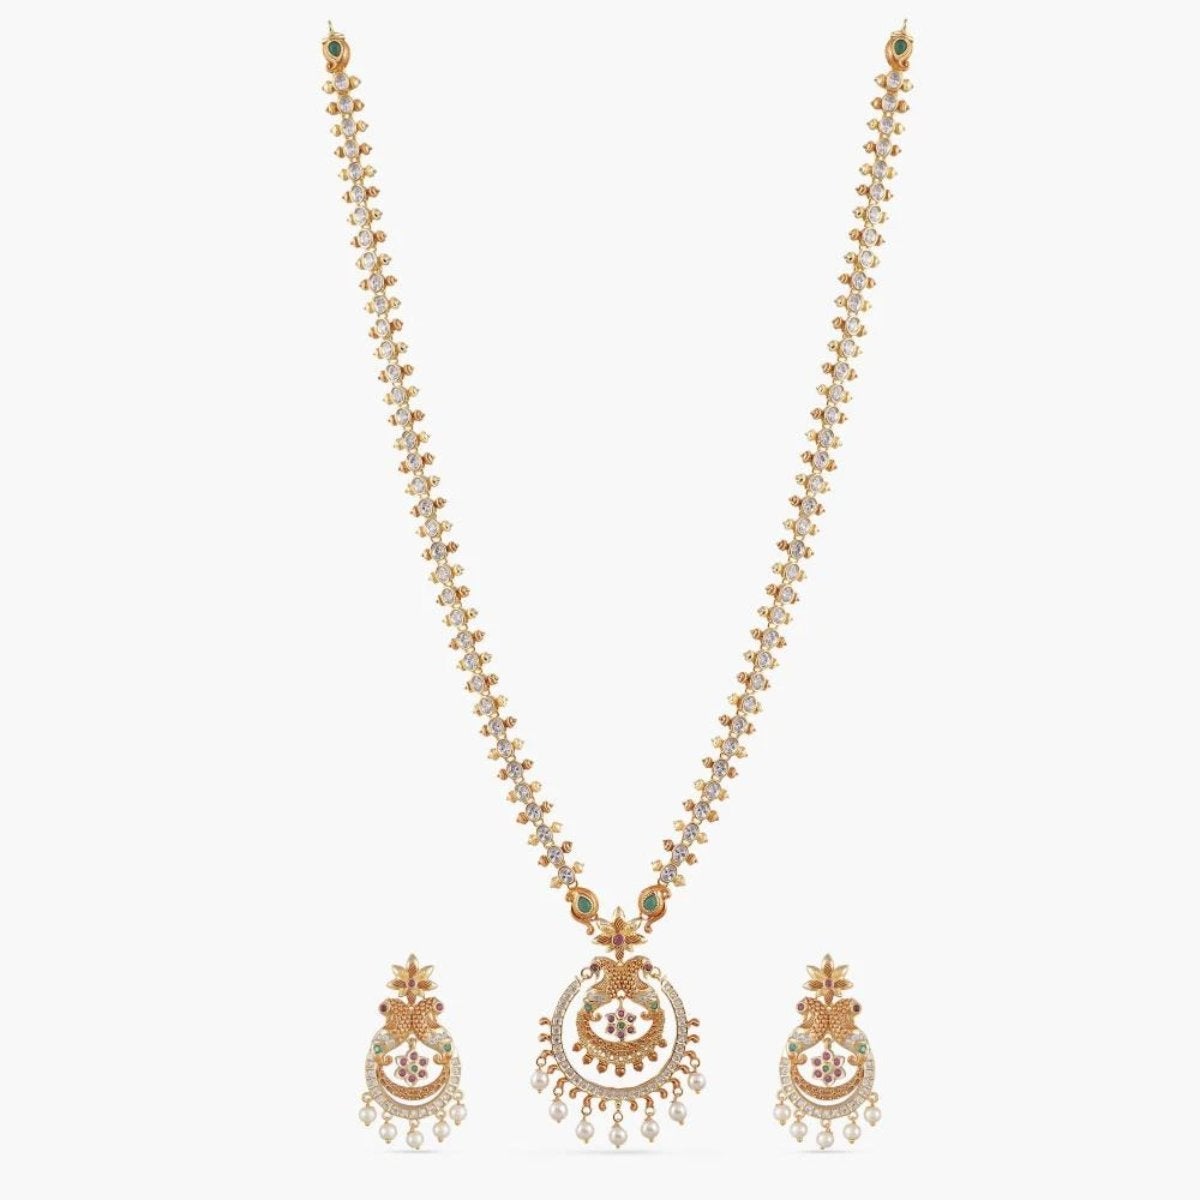 An image of Indian artificial jewelry. It is a gold necklace and earrings set with a peacock pendant, featuring Cubic Zirconia and green gemstones.